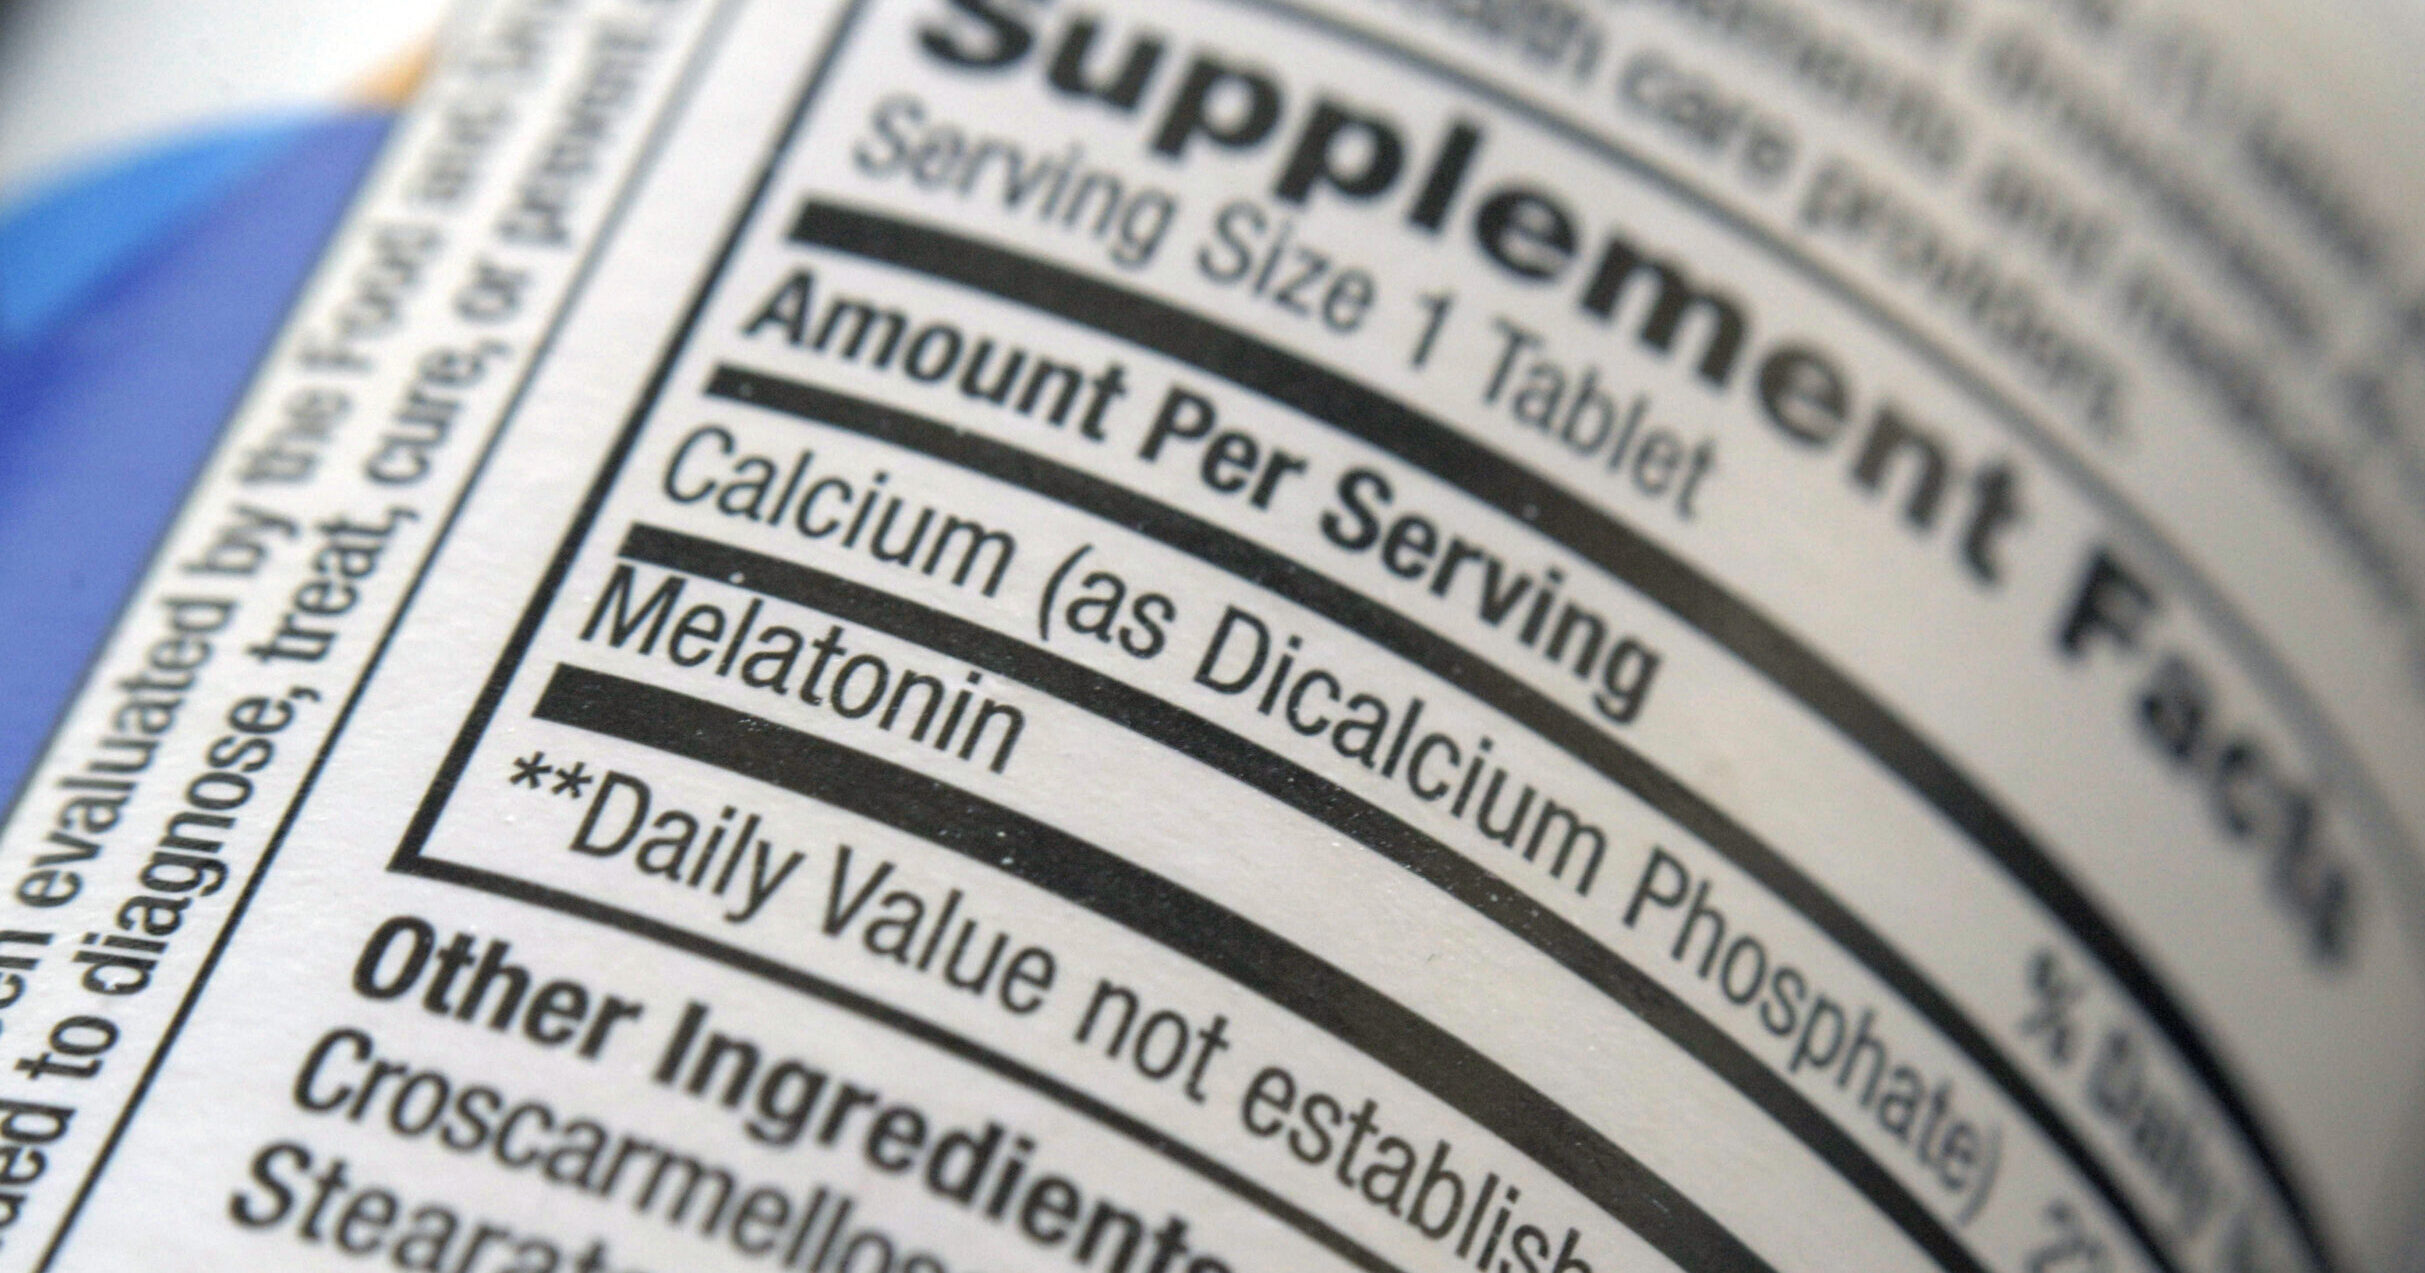 The label for a bottle of melatonin pills is seen in New York on Thursday, June 2, 2022. Melatonin is a hormone that helps control the body's sleep cycle. (AP Photo/Patrick Sison)